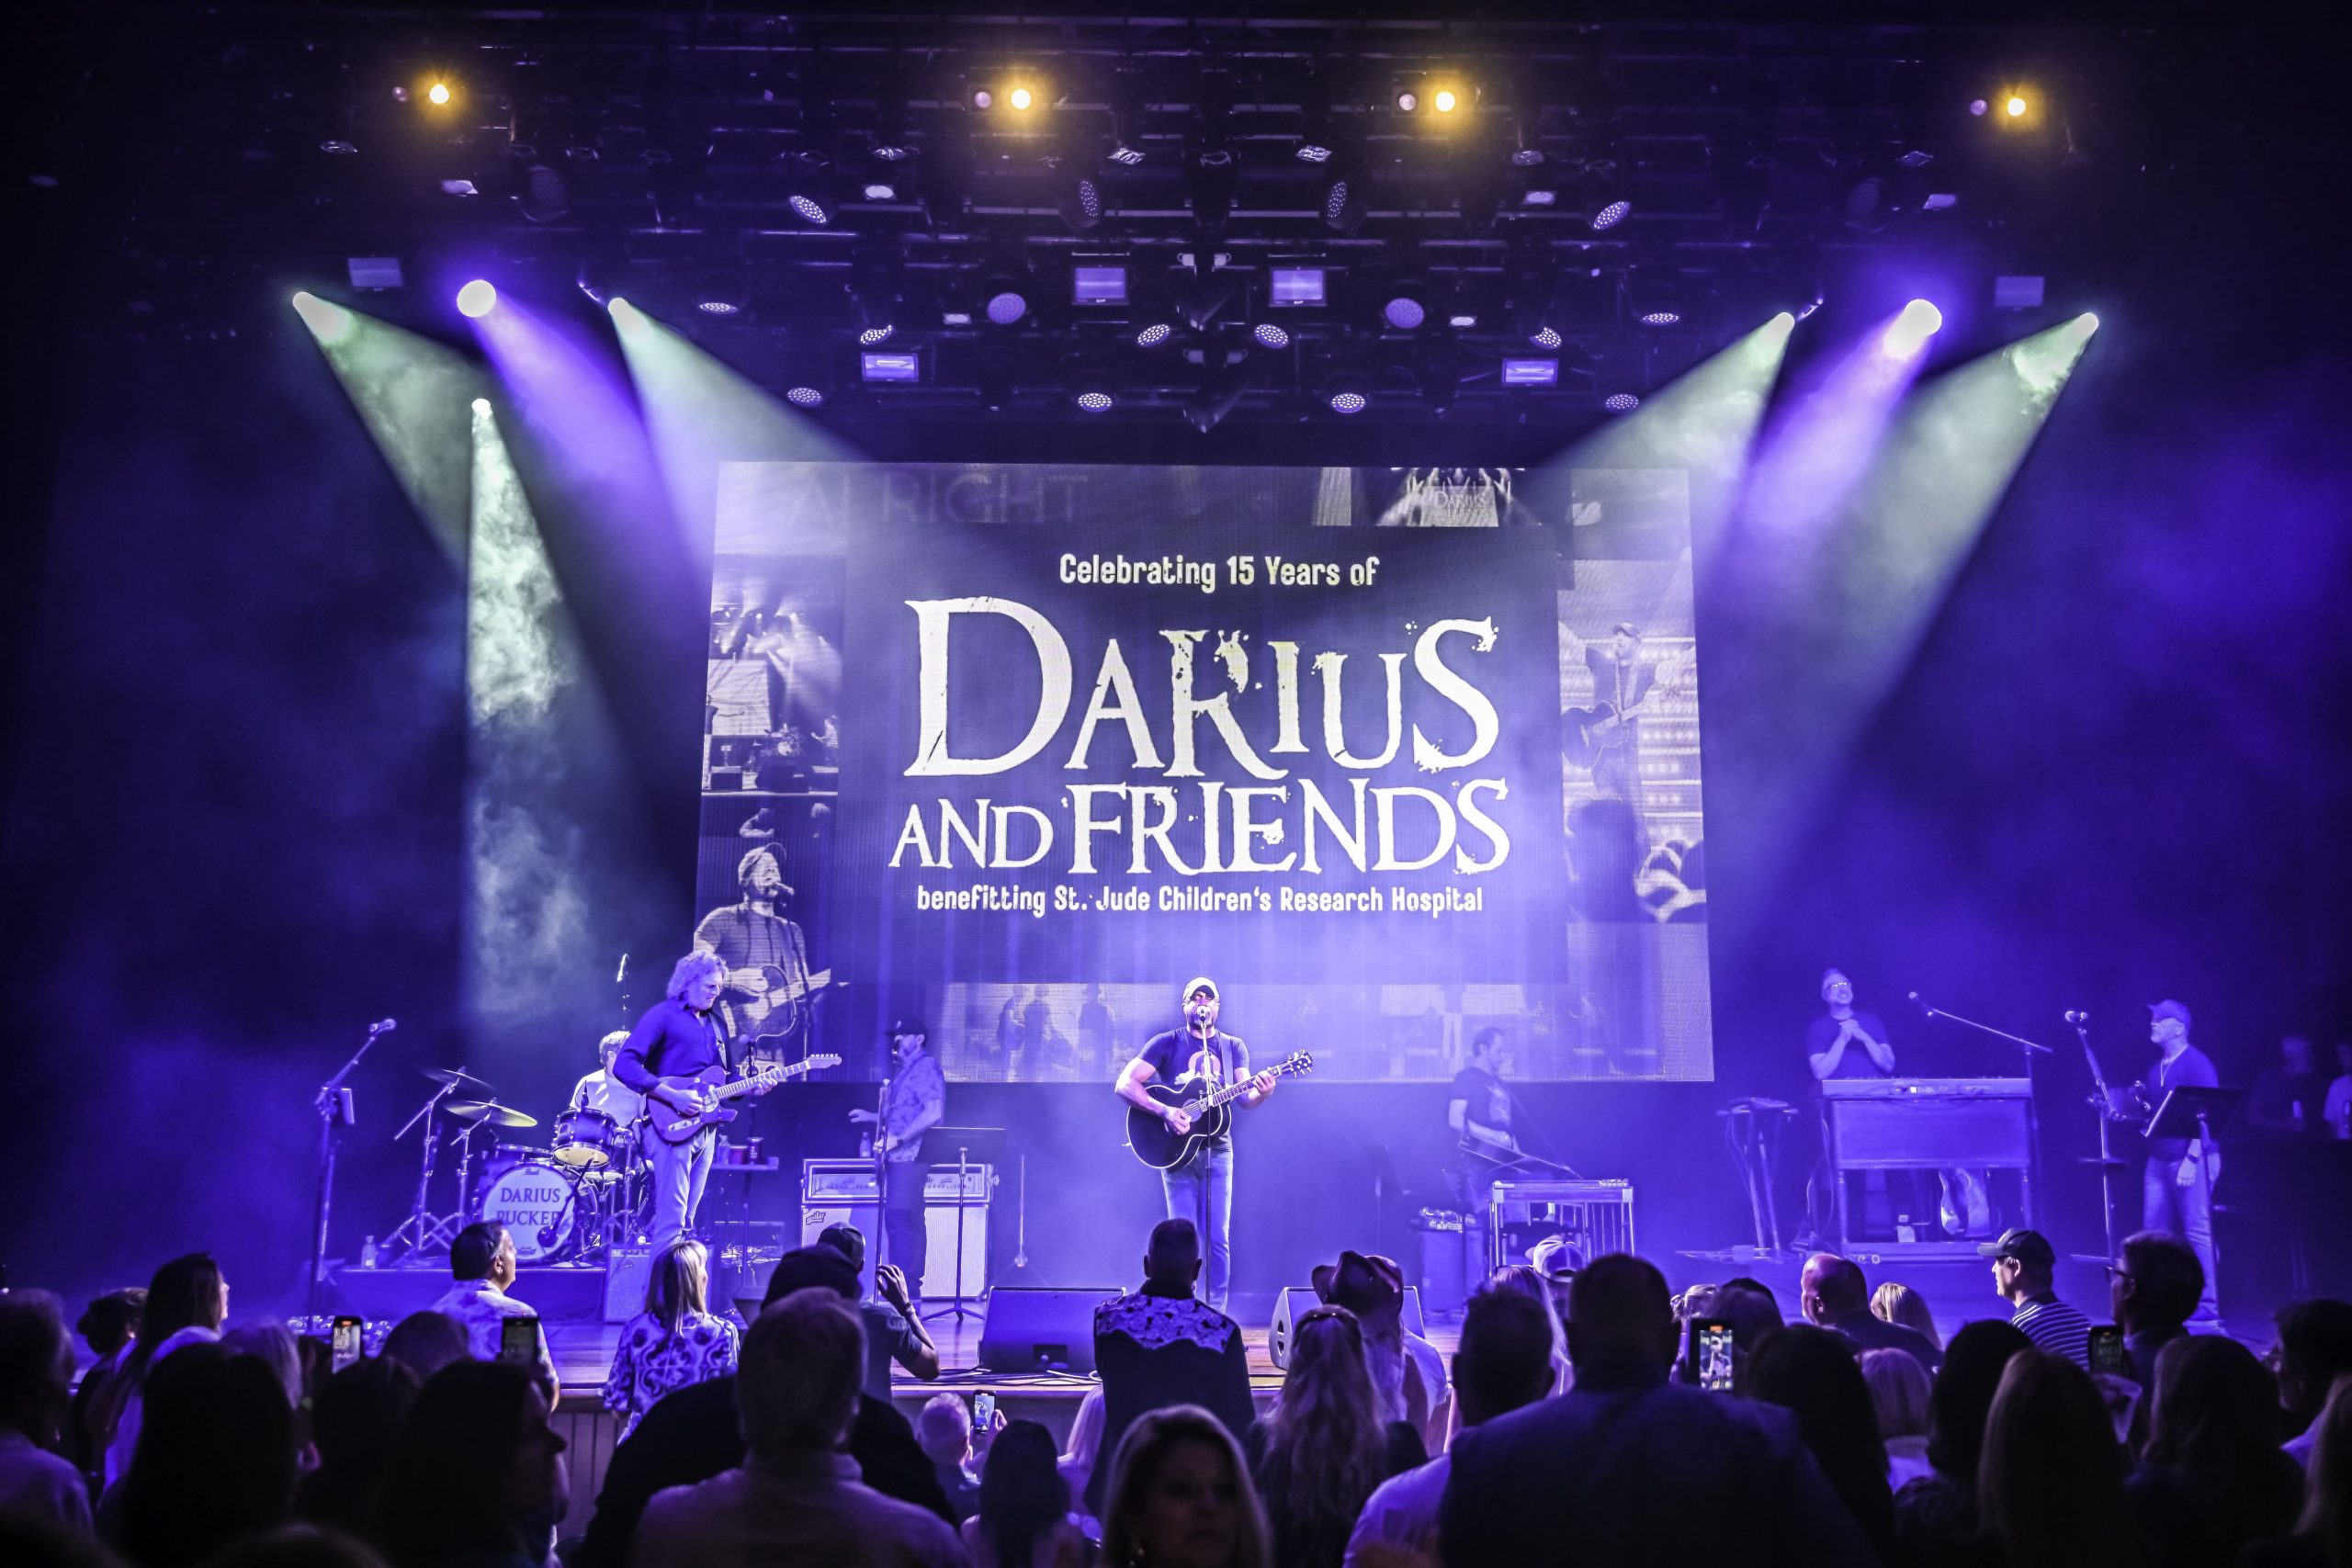 DARIUS RUCKER SURPASSES $4.3 MILLION TOTAL RAISED FOR ST. JUDE CHILDREN’S RESEARCH HOSPITAL WITH 15TH ANNUAL “DARIUS AND FRIENDS”